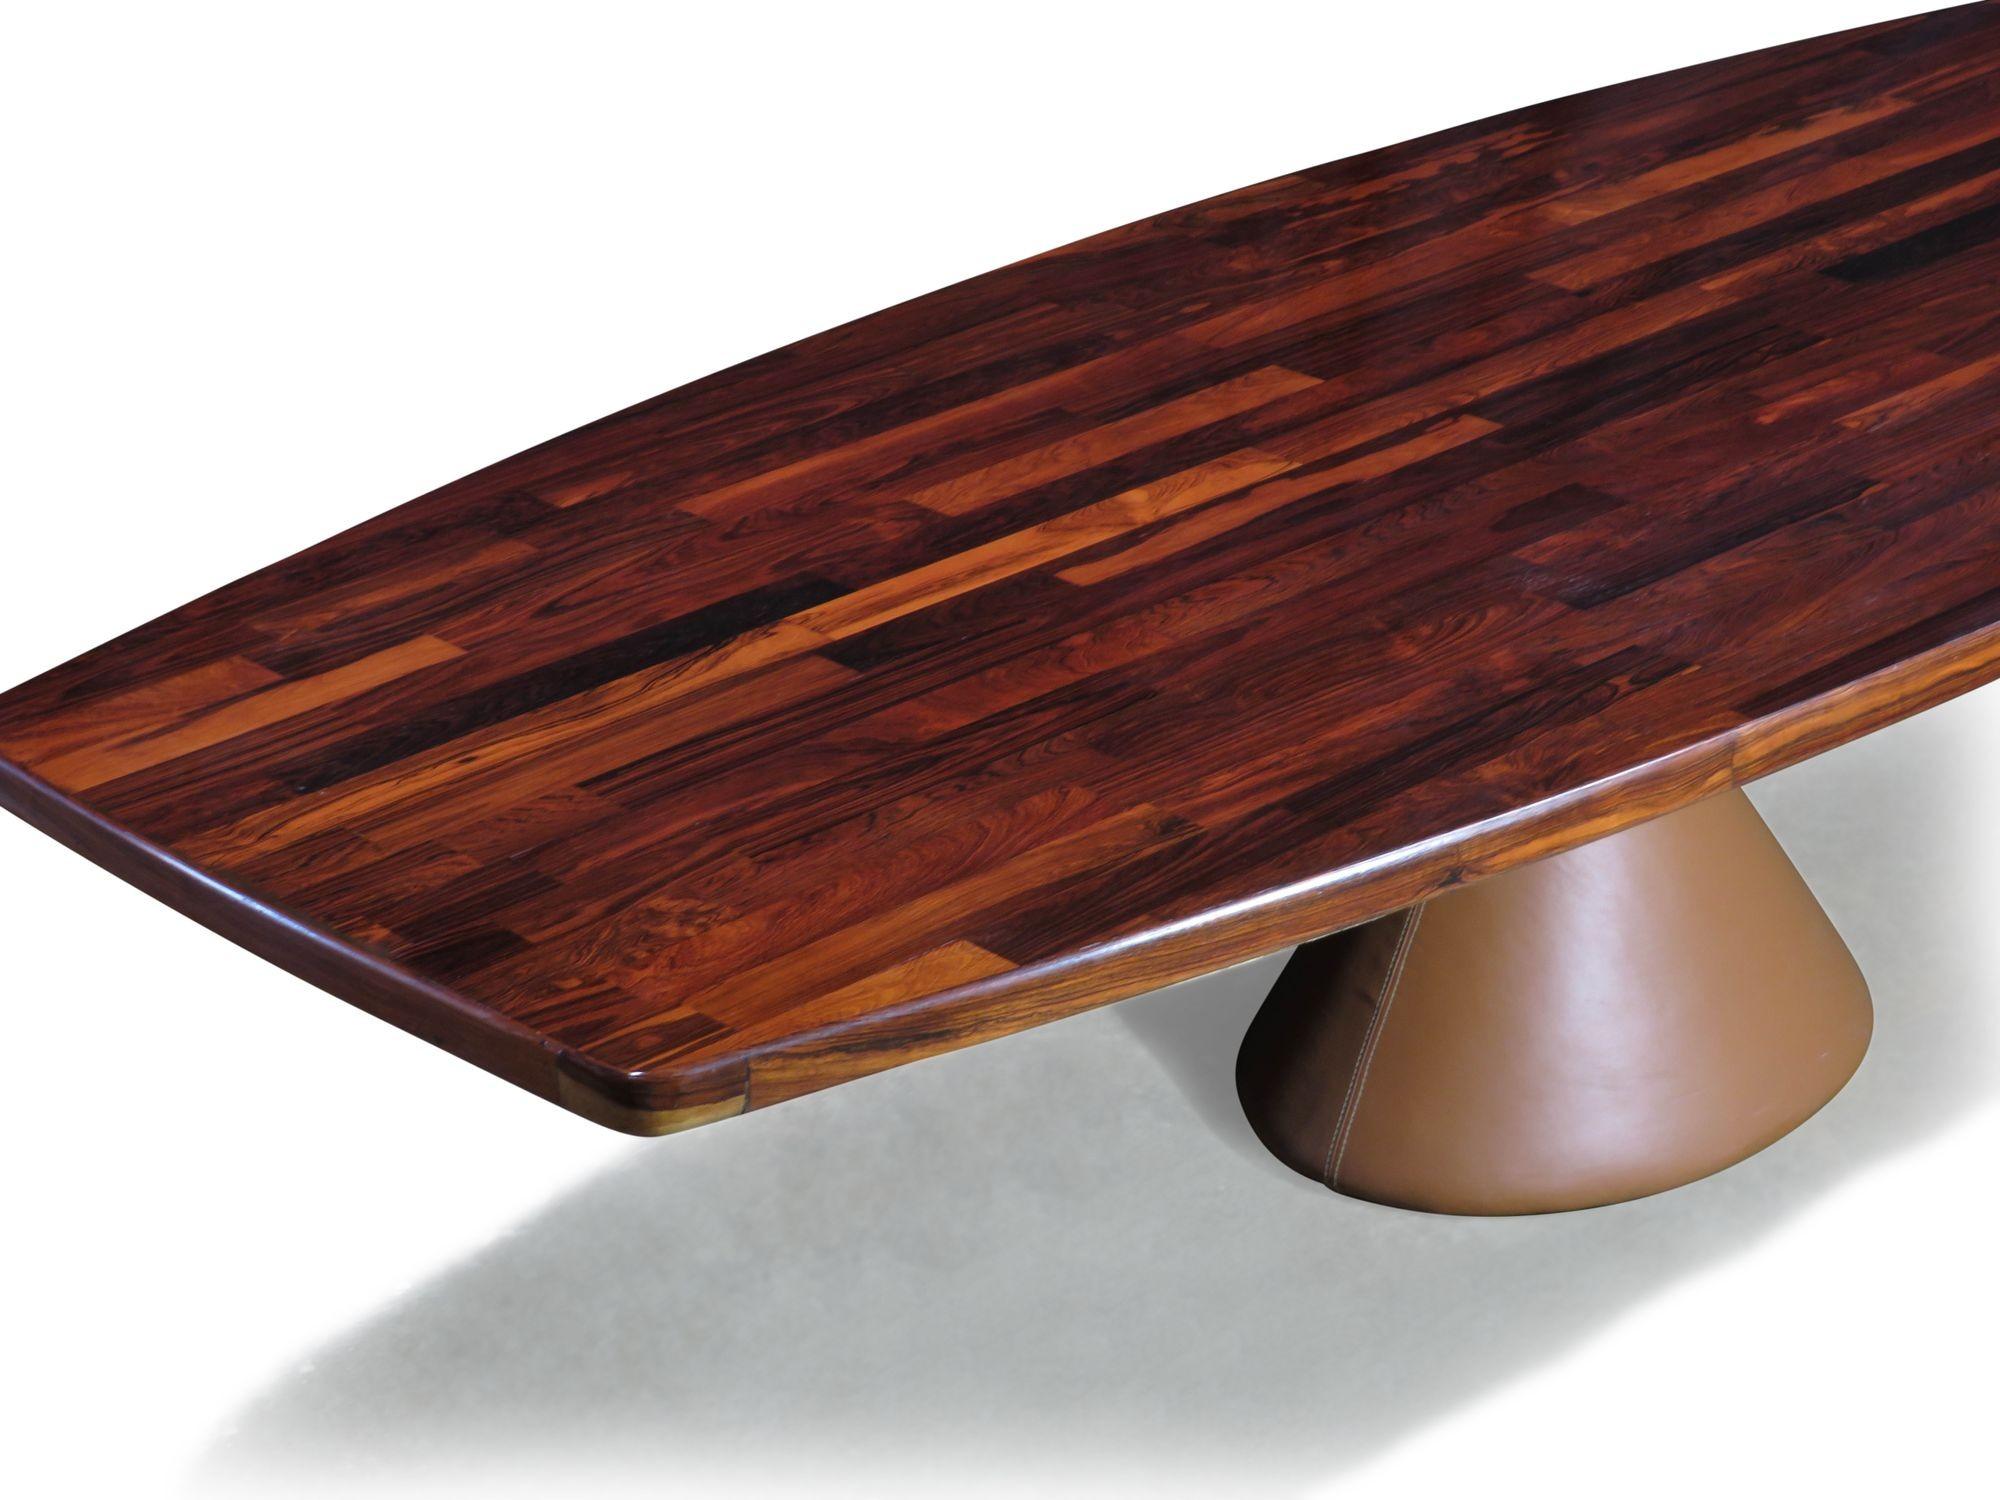 Iconic Guanabara table originally designed by Jorge Zalszupin for L'atelier, 1959. Features an impressive boat-shaped rosewood top over a massive concrete base covered in a saddle leather. The patchwork top has a well balanced composition of light